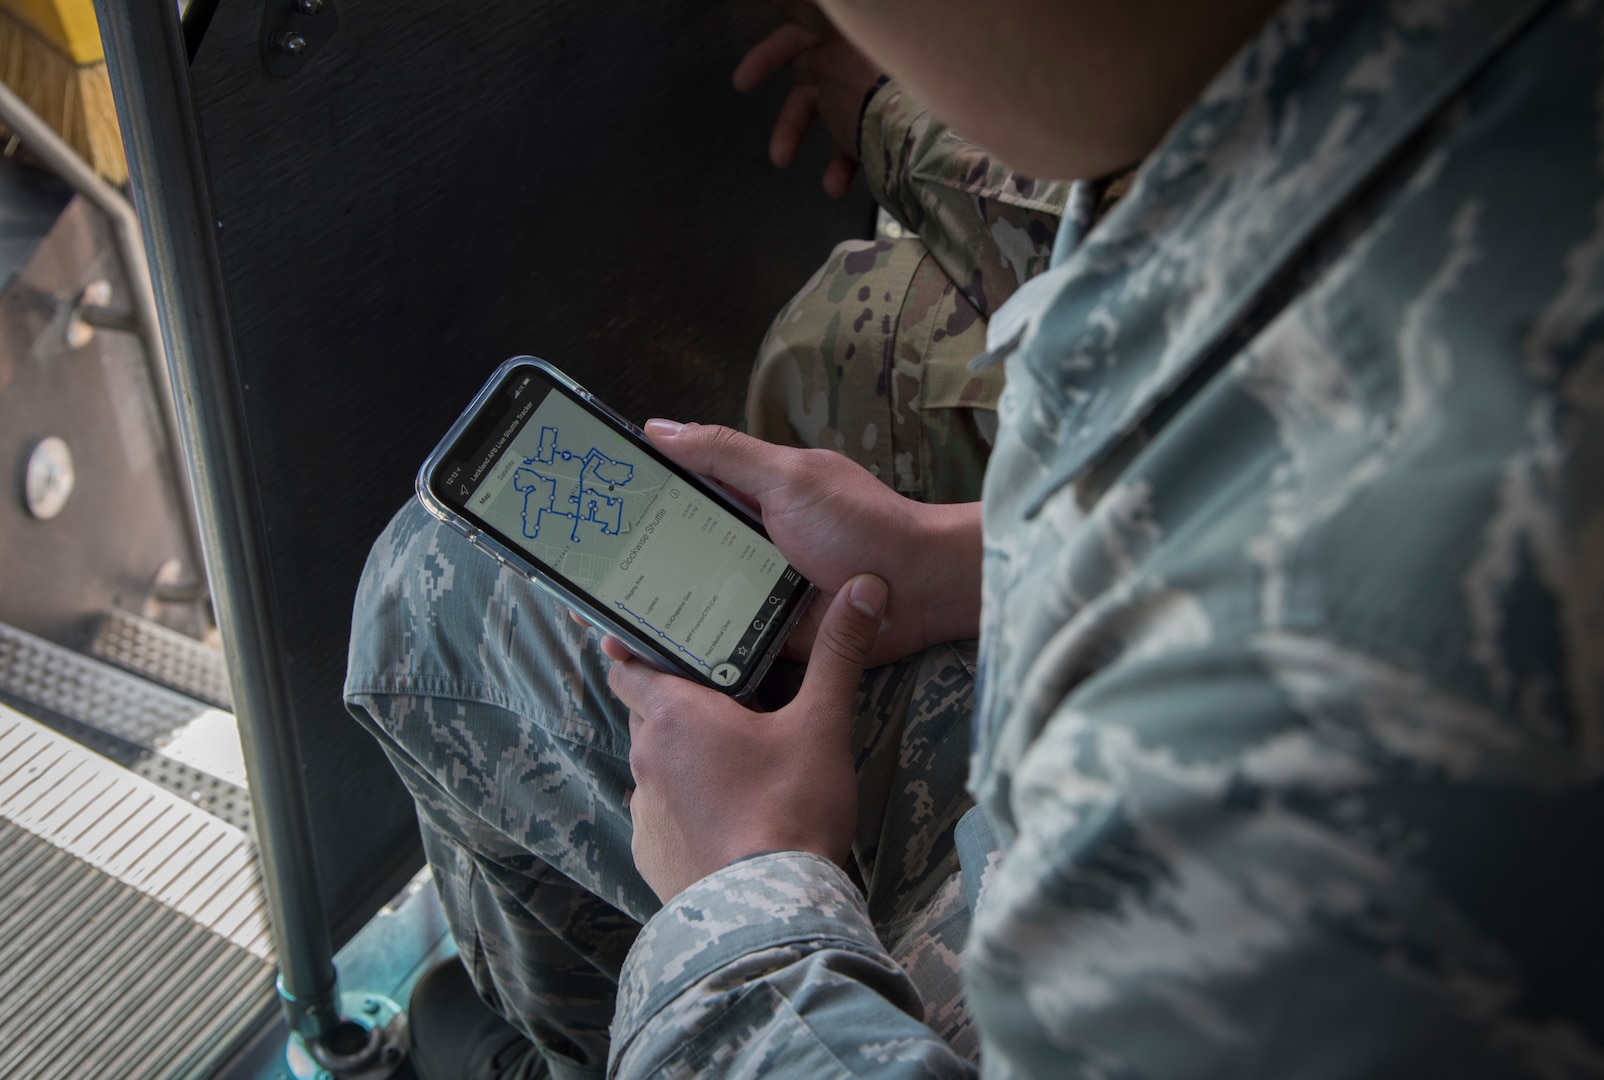 Airman 1st Class Michael Prado, 343rd Training Squadron student, navigates through the new “Ride Systems” application for Joint Base San Antonio shuttles at JBSA-Lackland Feb. 20, 2019.  The app includes Global Positioning System tracking capabilities with mapping and coordination with the ground transportation offices to track exactly where each bus is, their route and how long the wait time is.